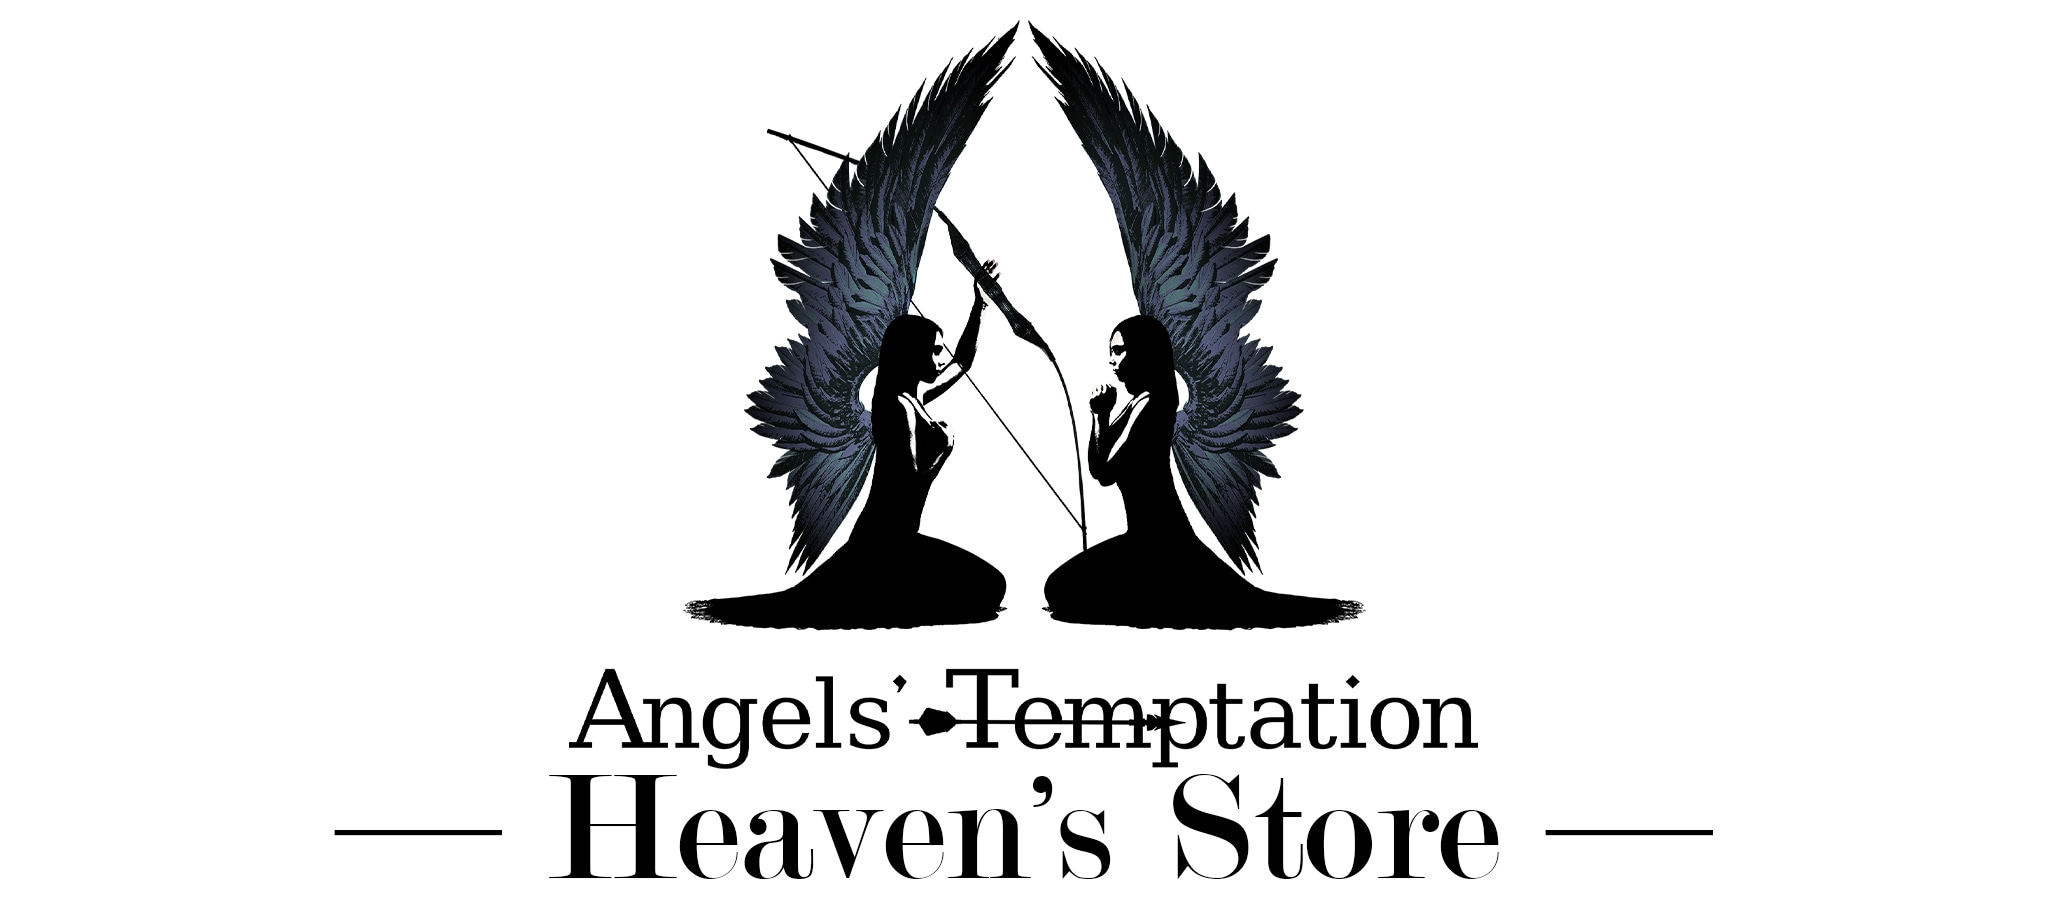 Heaven's Store | Angels' Temptation公式通販サイト